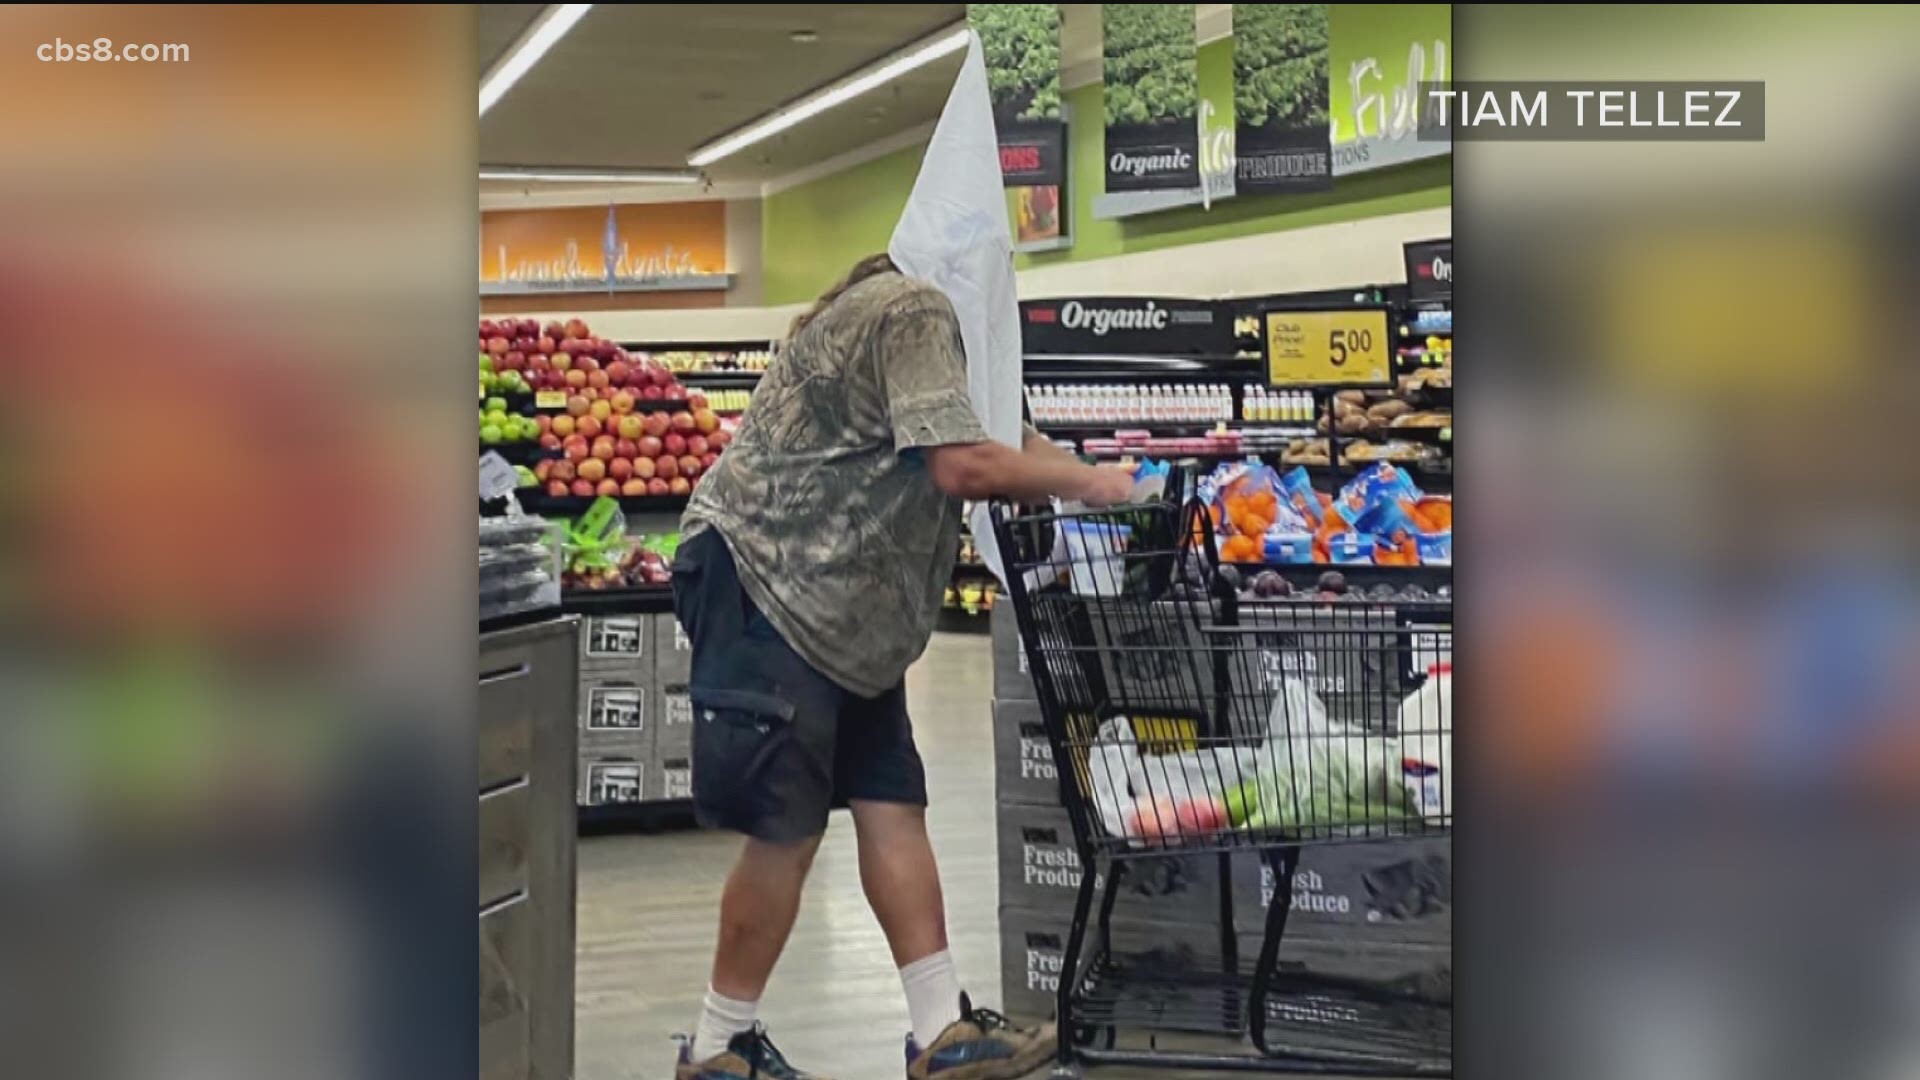 A disturbing post, showing a man wearing a KKK hood while grocery shopping at Vons, has been circulating on social media.